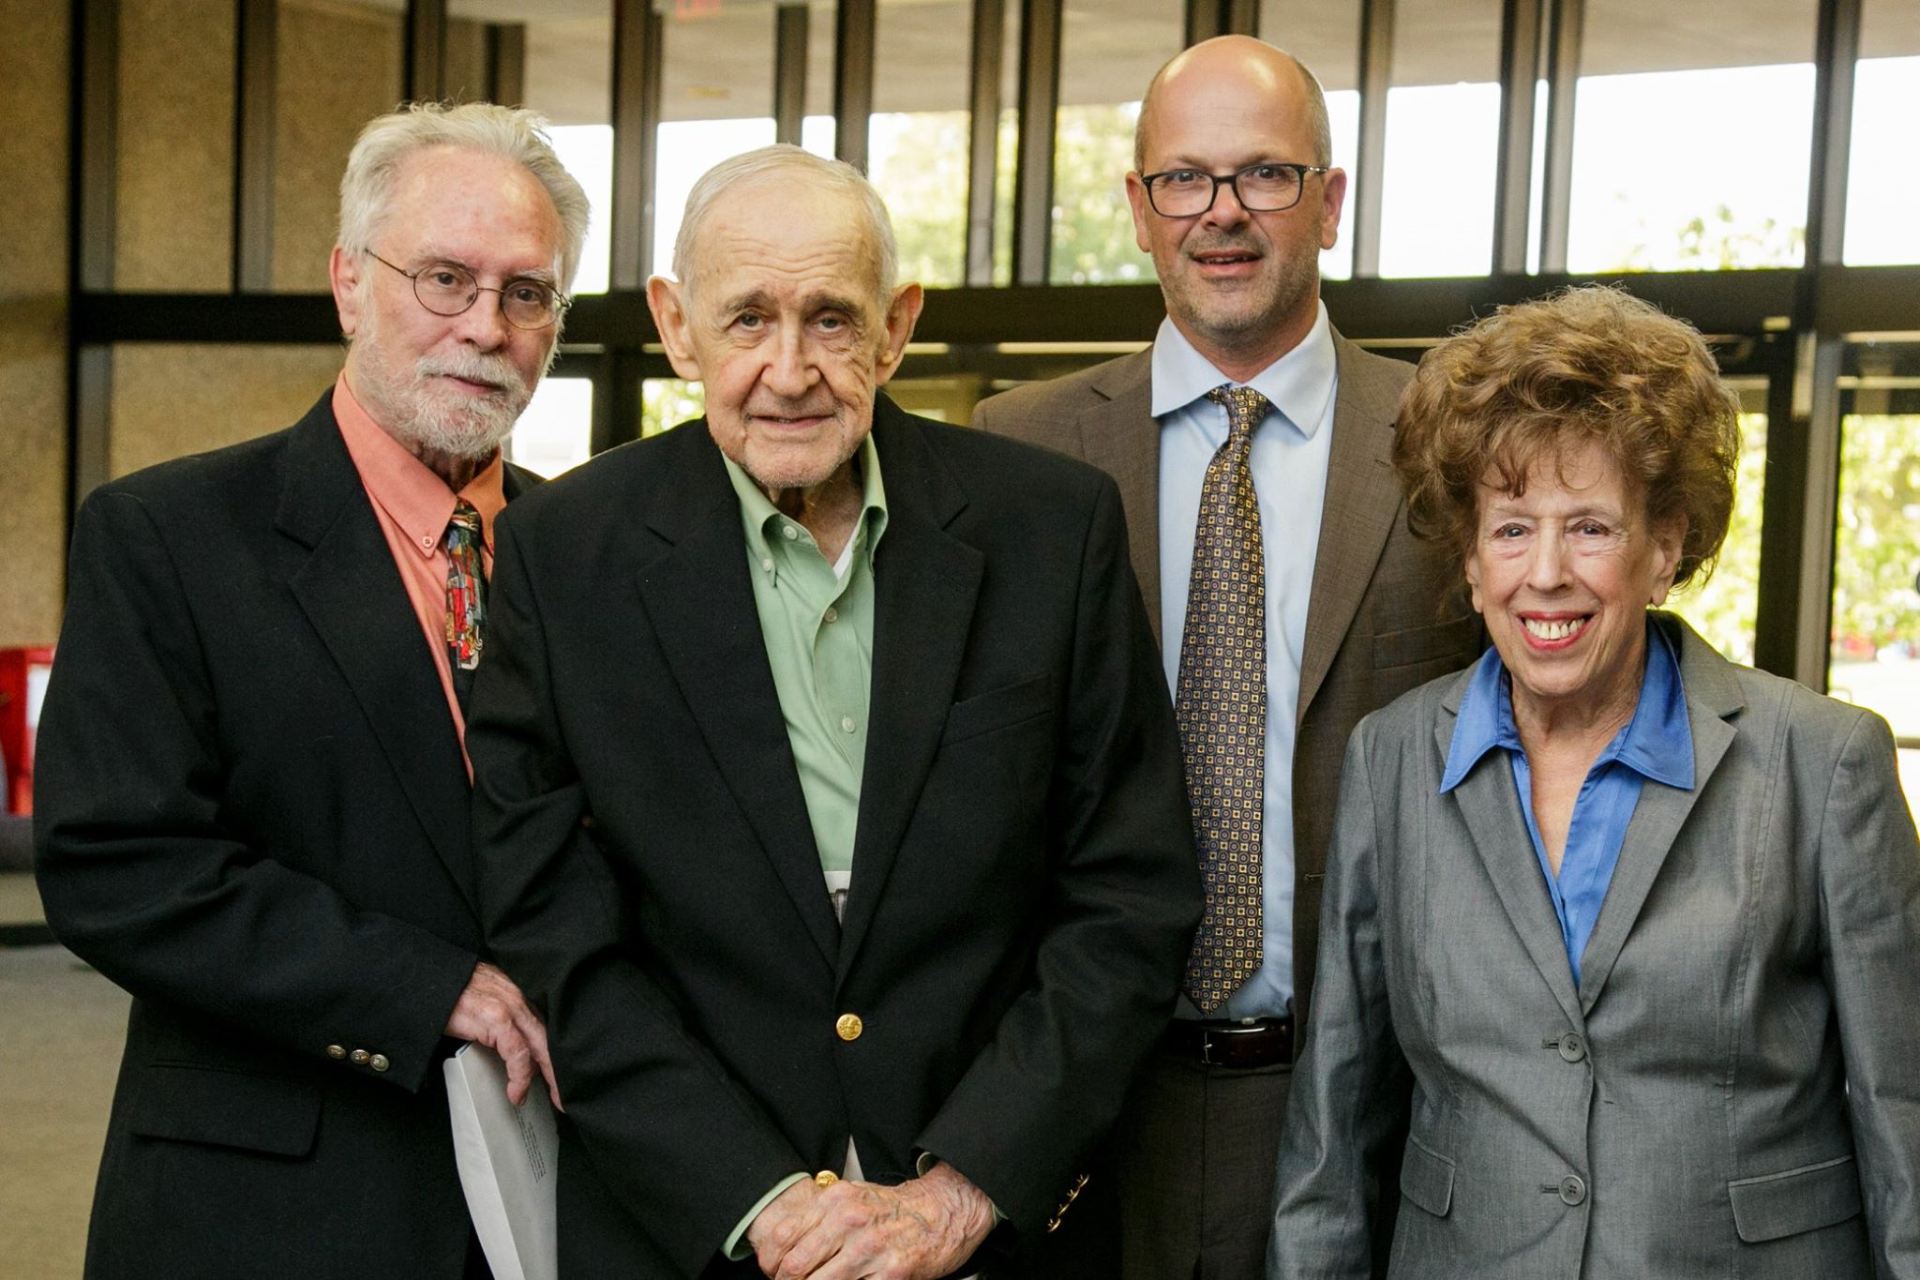 From left, Dr. David Patterson, Edward M. Ackerman, Dr. Nils Roemer and Dr. Zsuzsanna Ozsváth at the Burton C. Einspruch Holocaust Lecture in 2016.